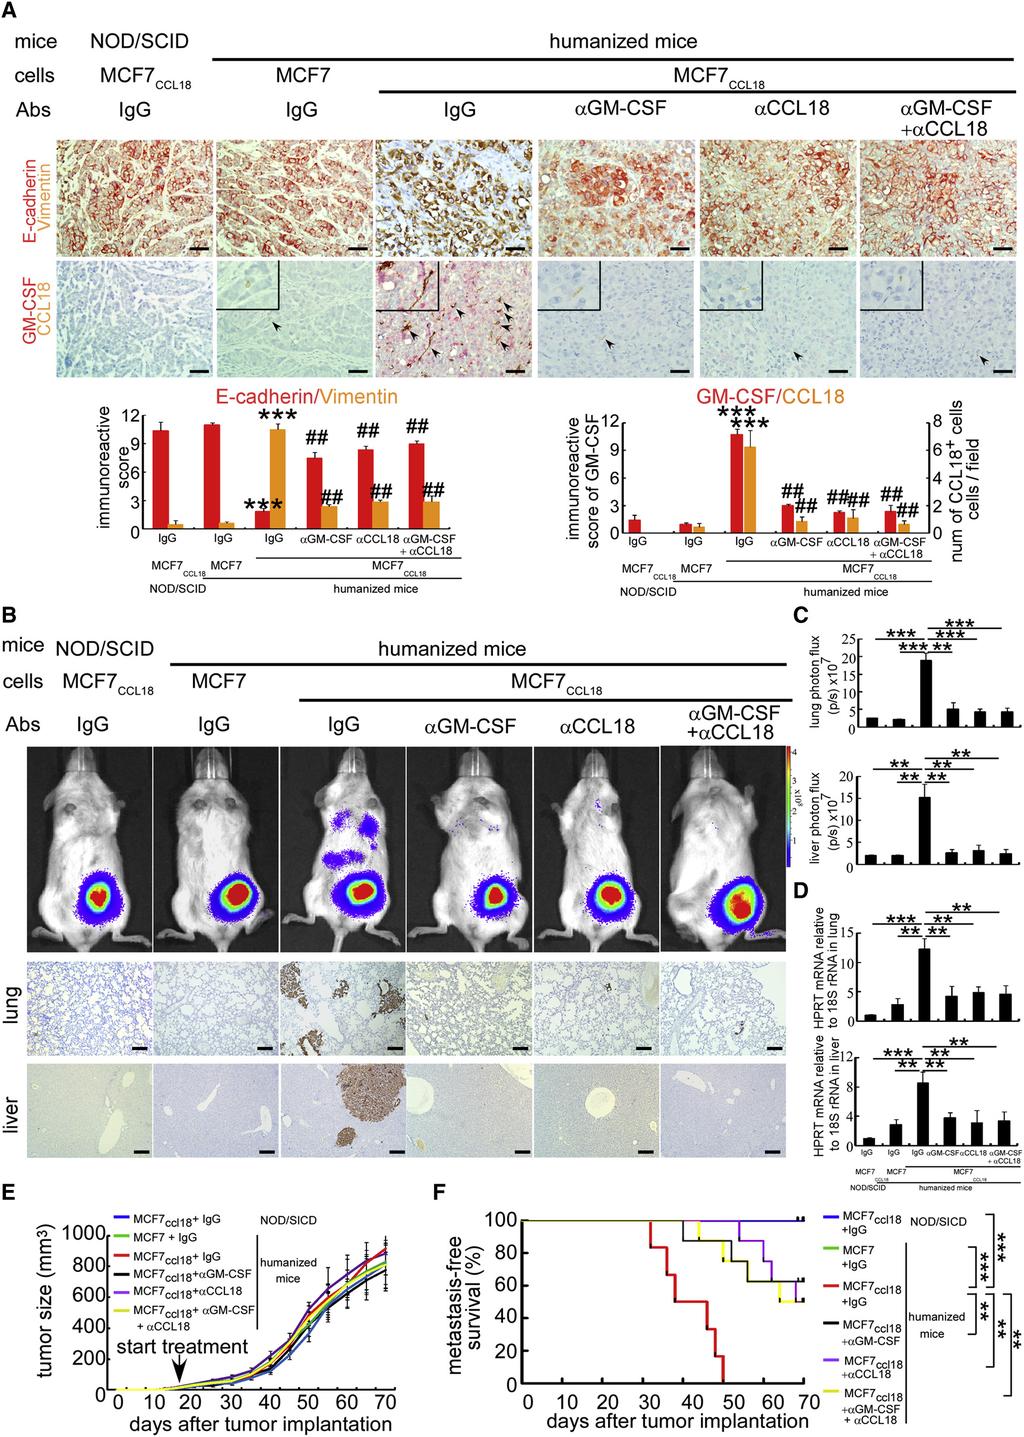 Cancer Cell GM-CSF-CCL18 Loop Promotes Breast Cancer Metastasis Figure 6.